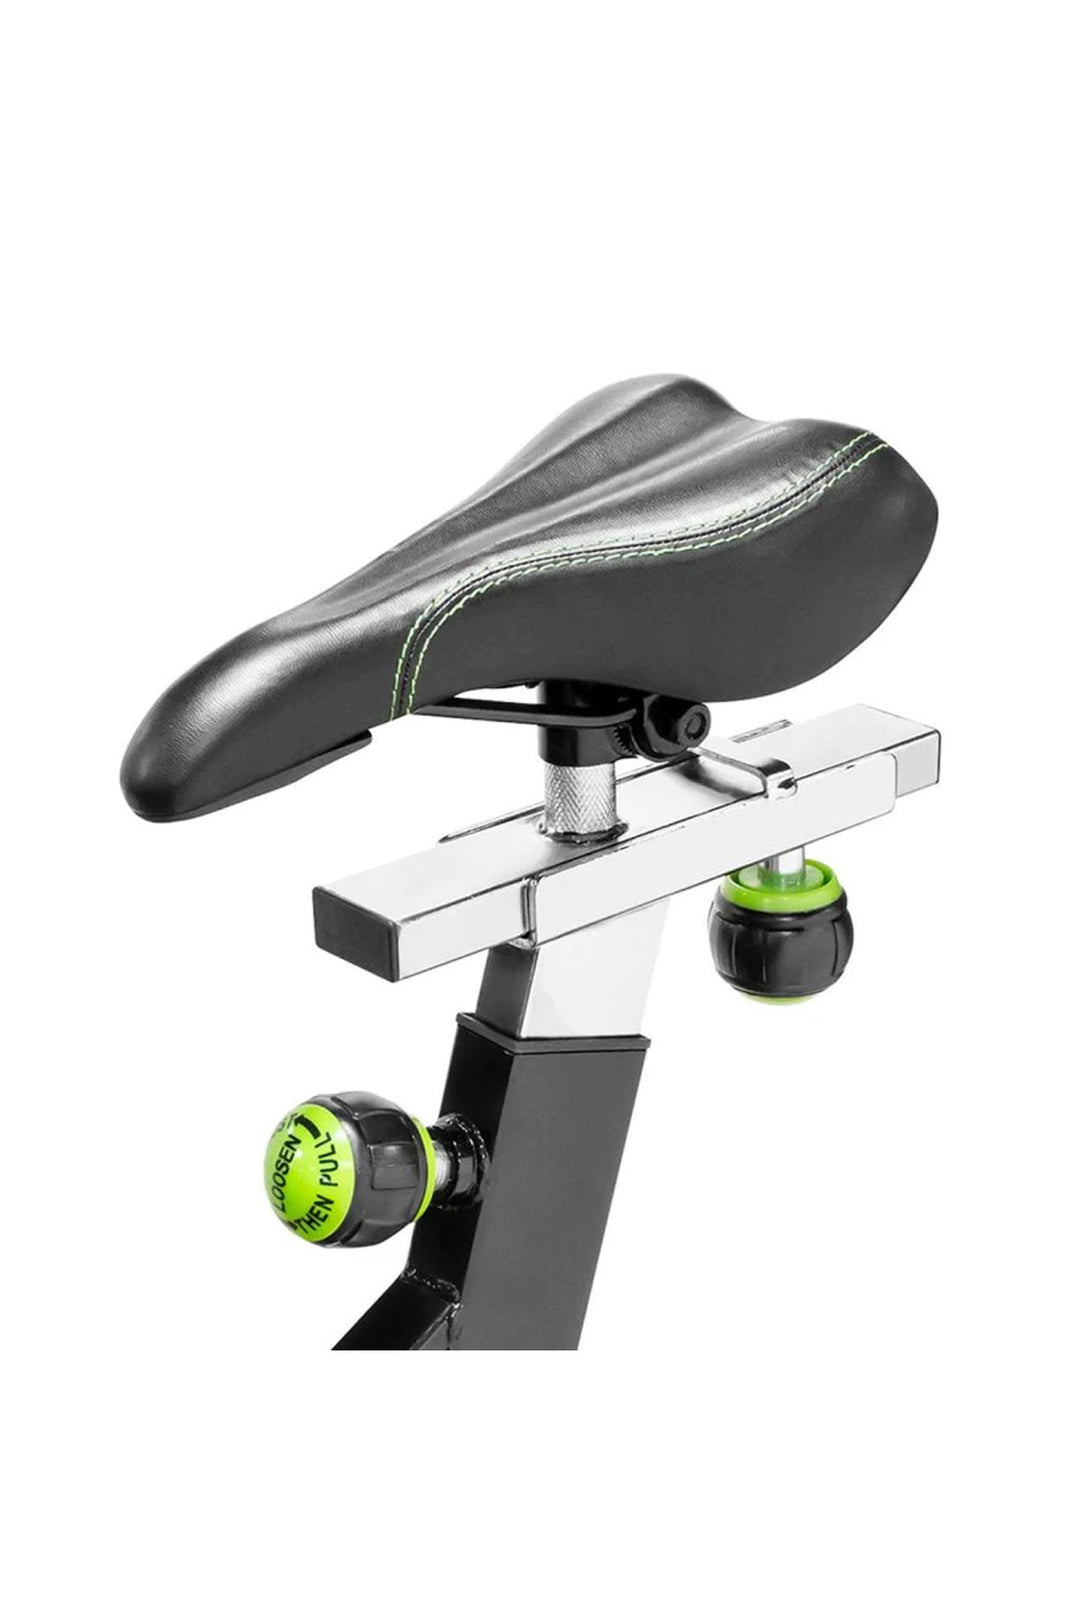 Seat of Marcy Club Trainer Spin Bike